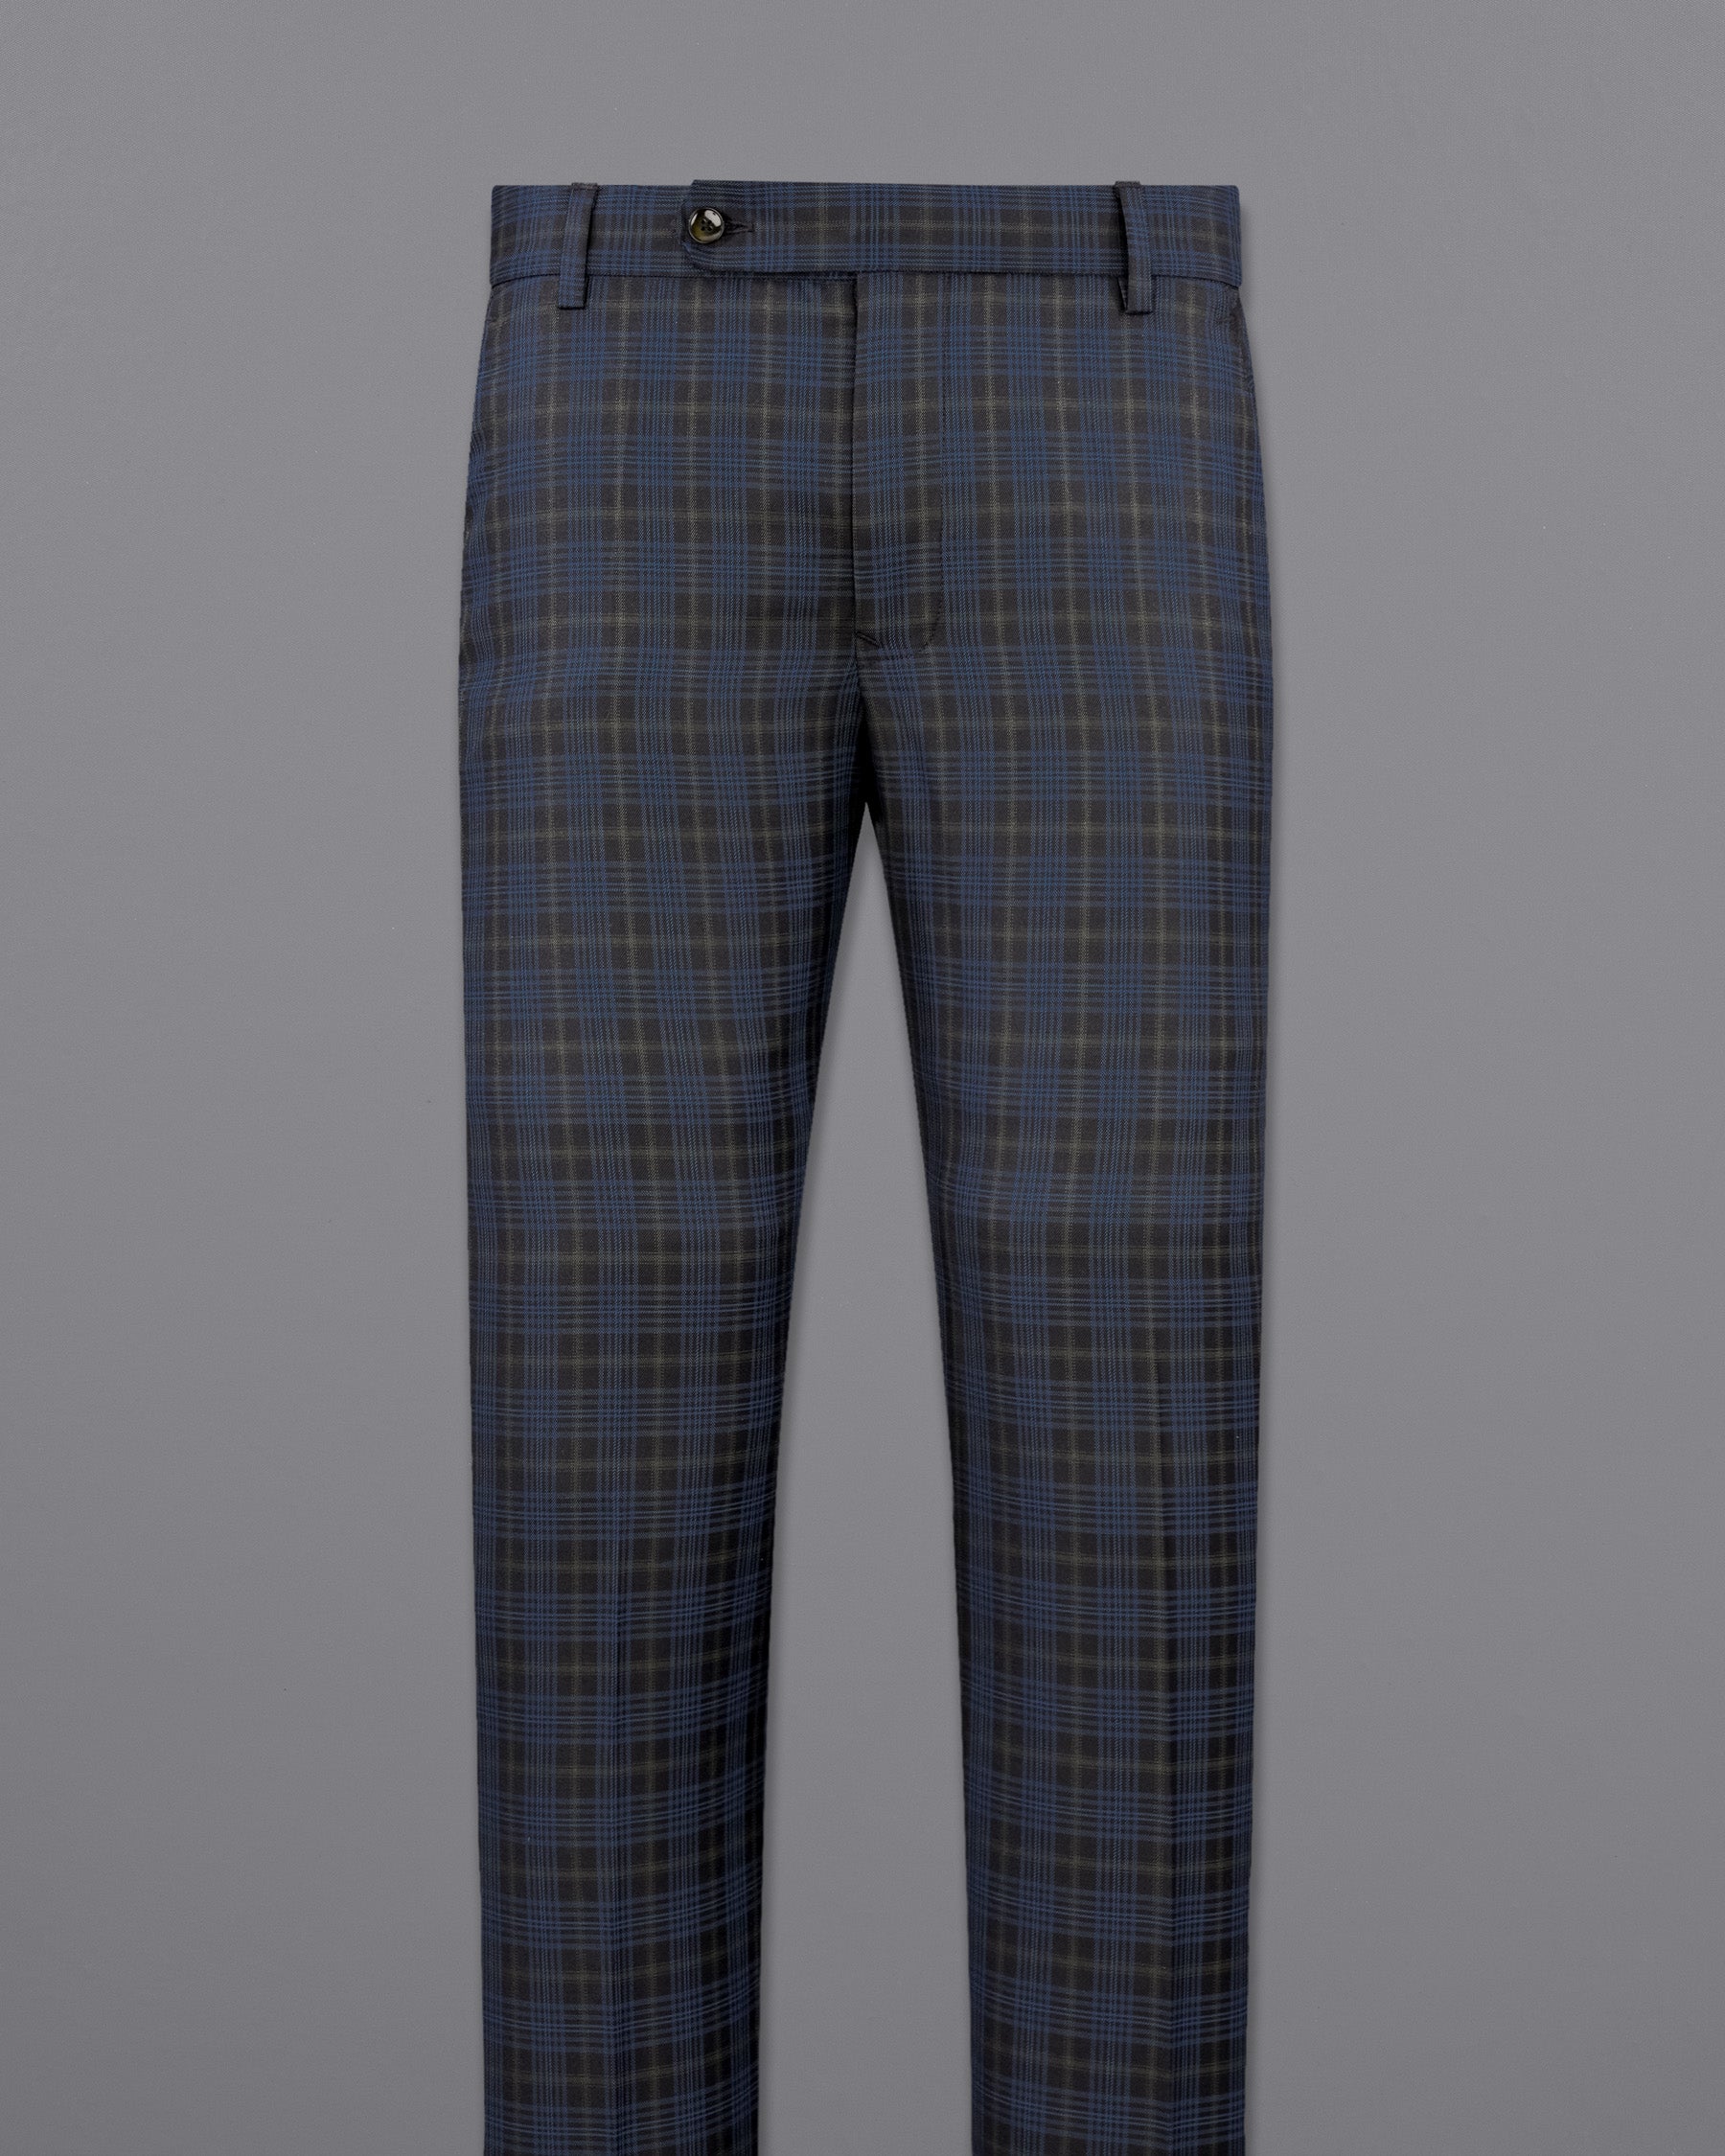 Fiord Navy Blue with Black Russian Plaid Pant